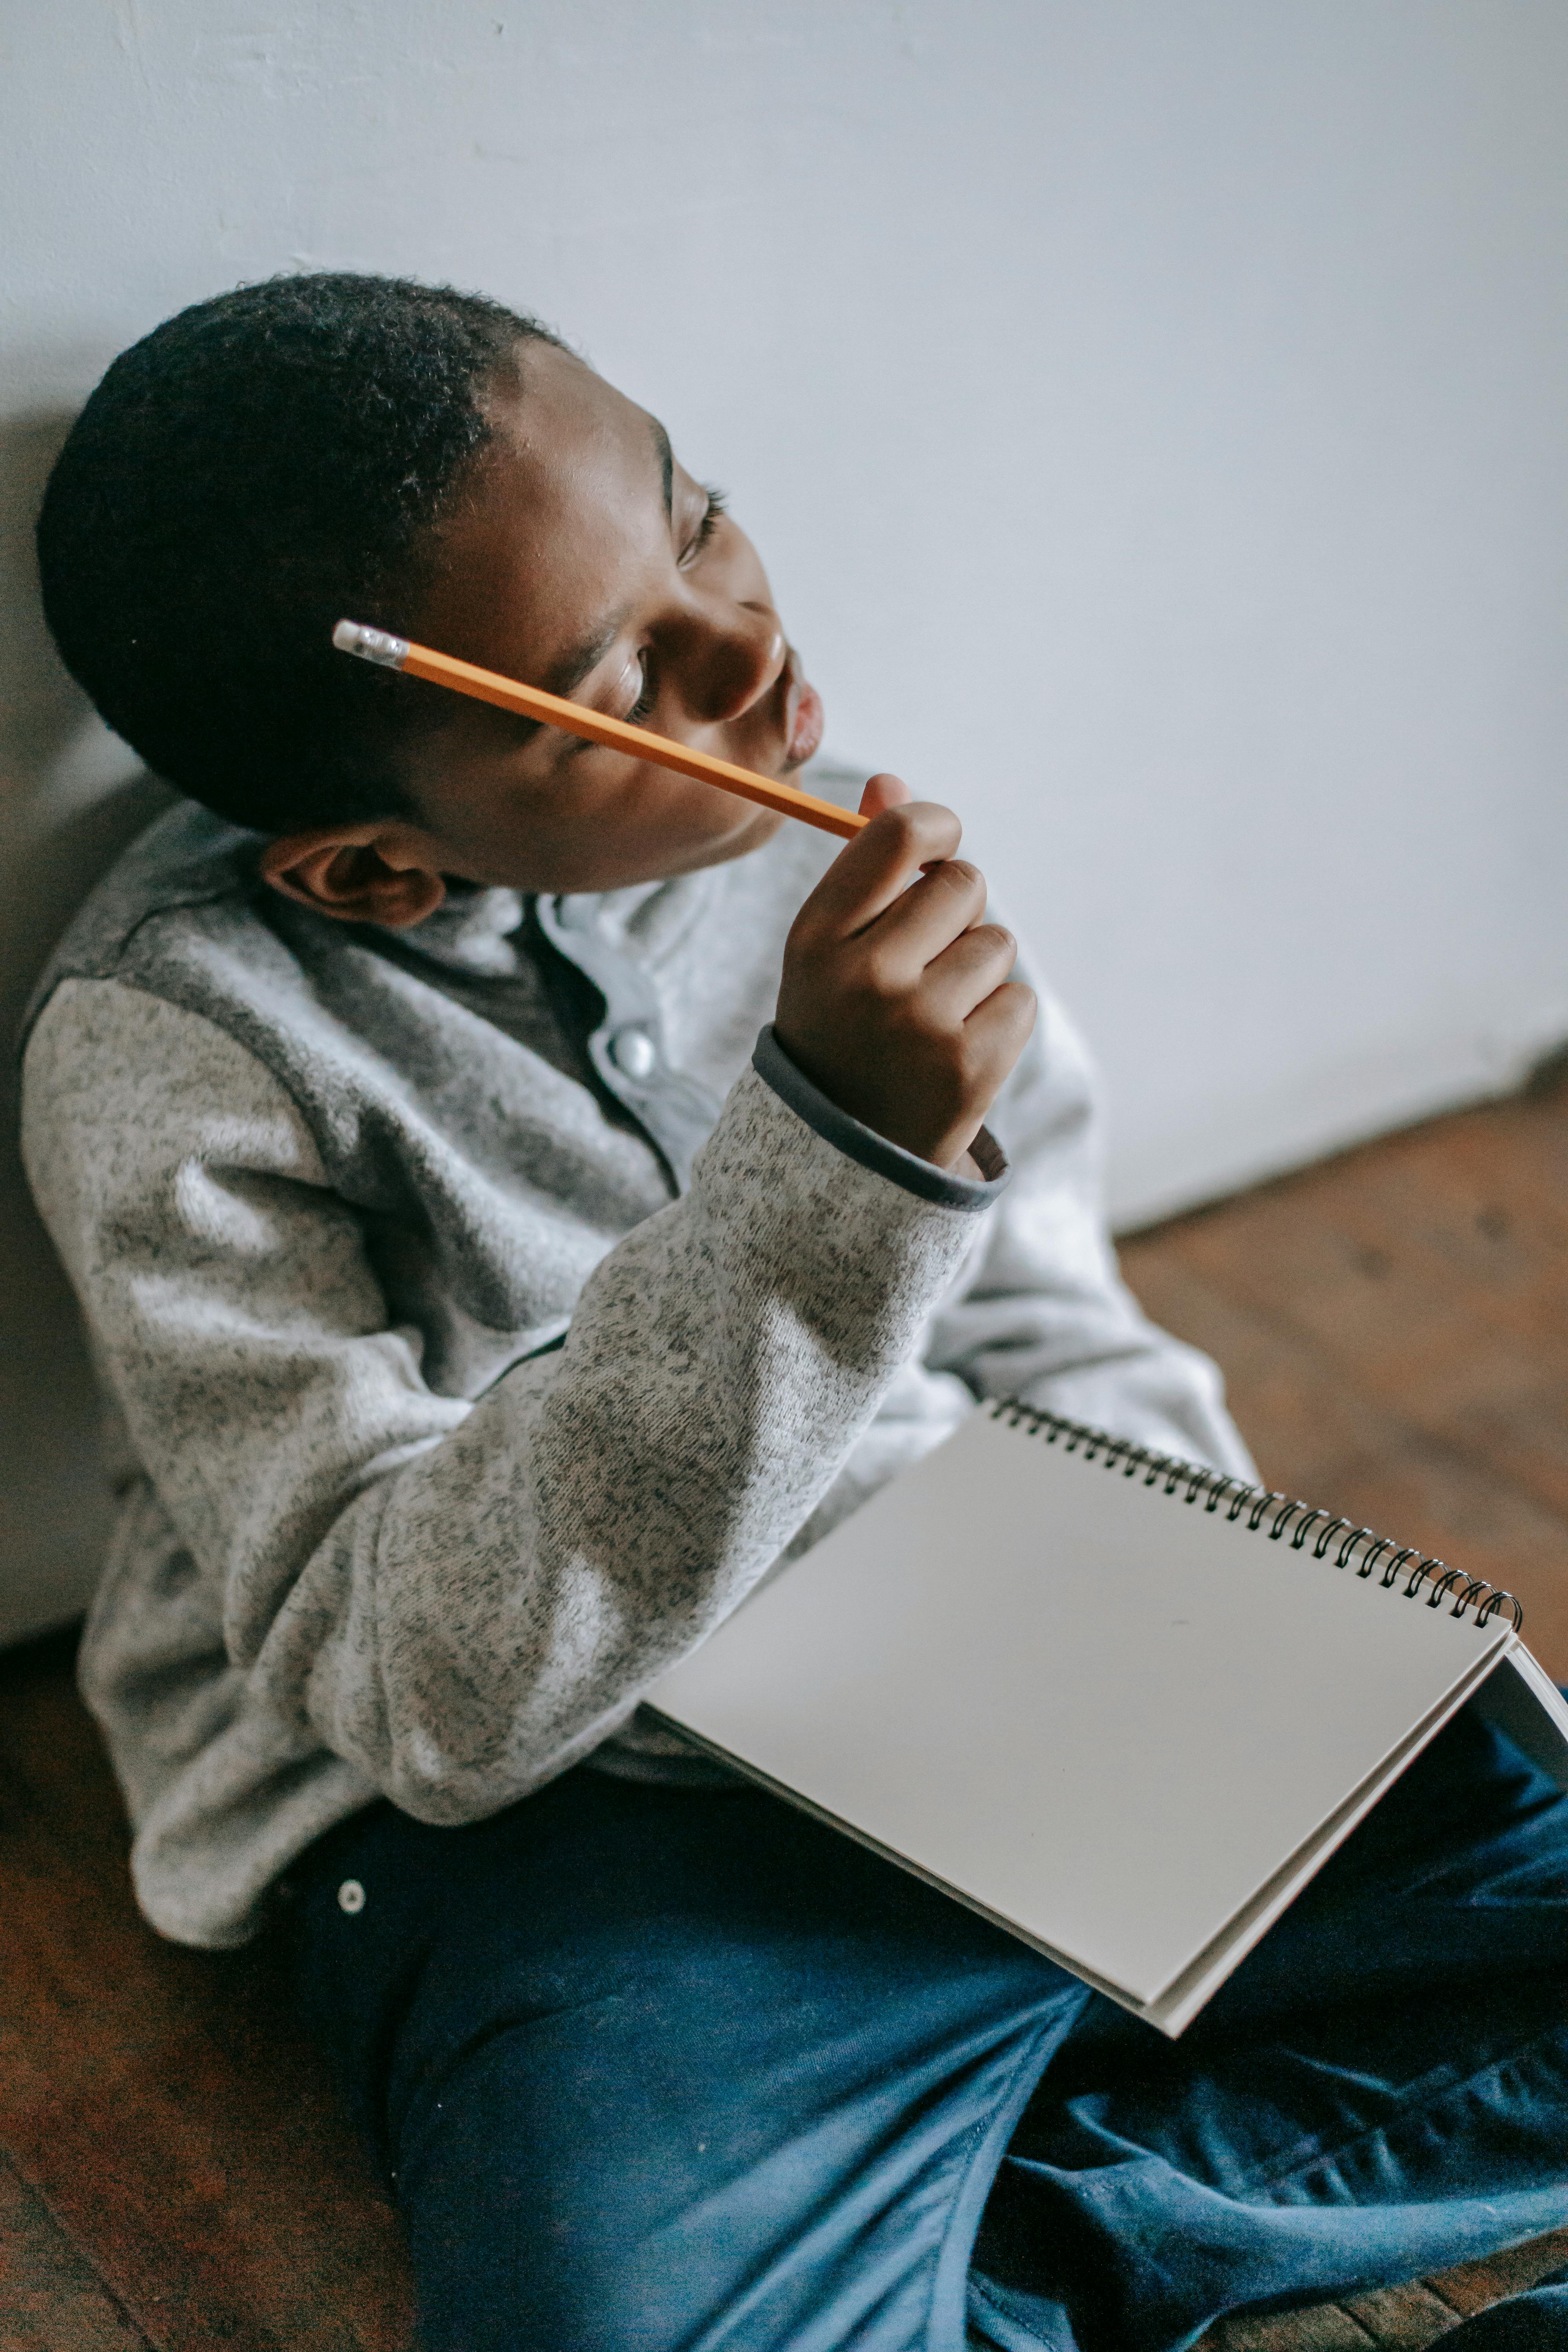 pensive black kid with notepad and pencil